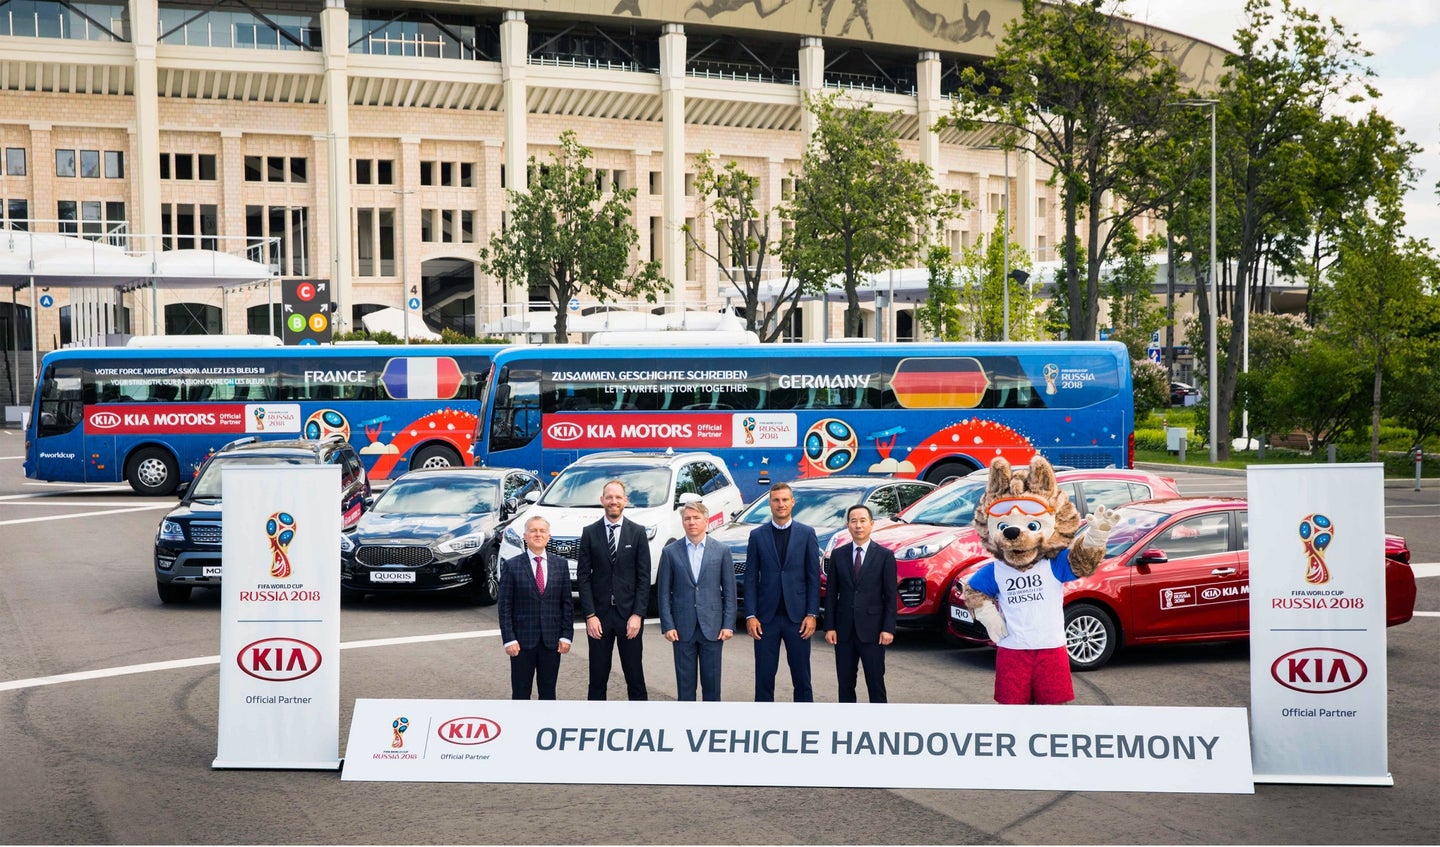 Kia Provides 424 Vehicles for Official Use at 2018 FIFA World Cup Russia